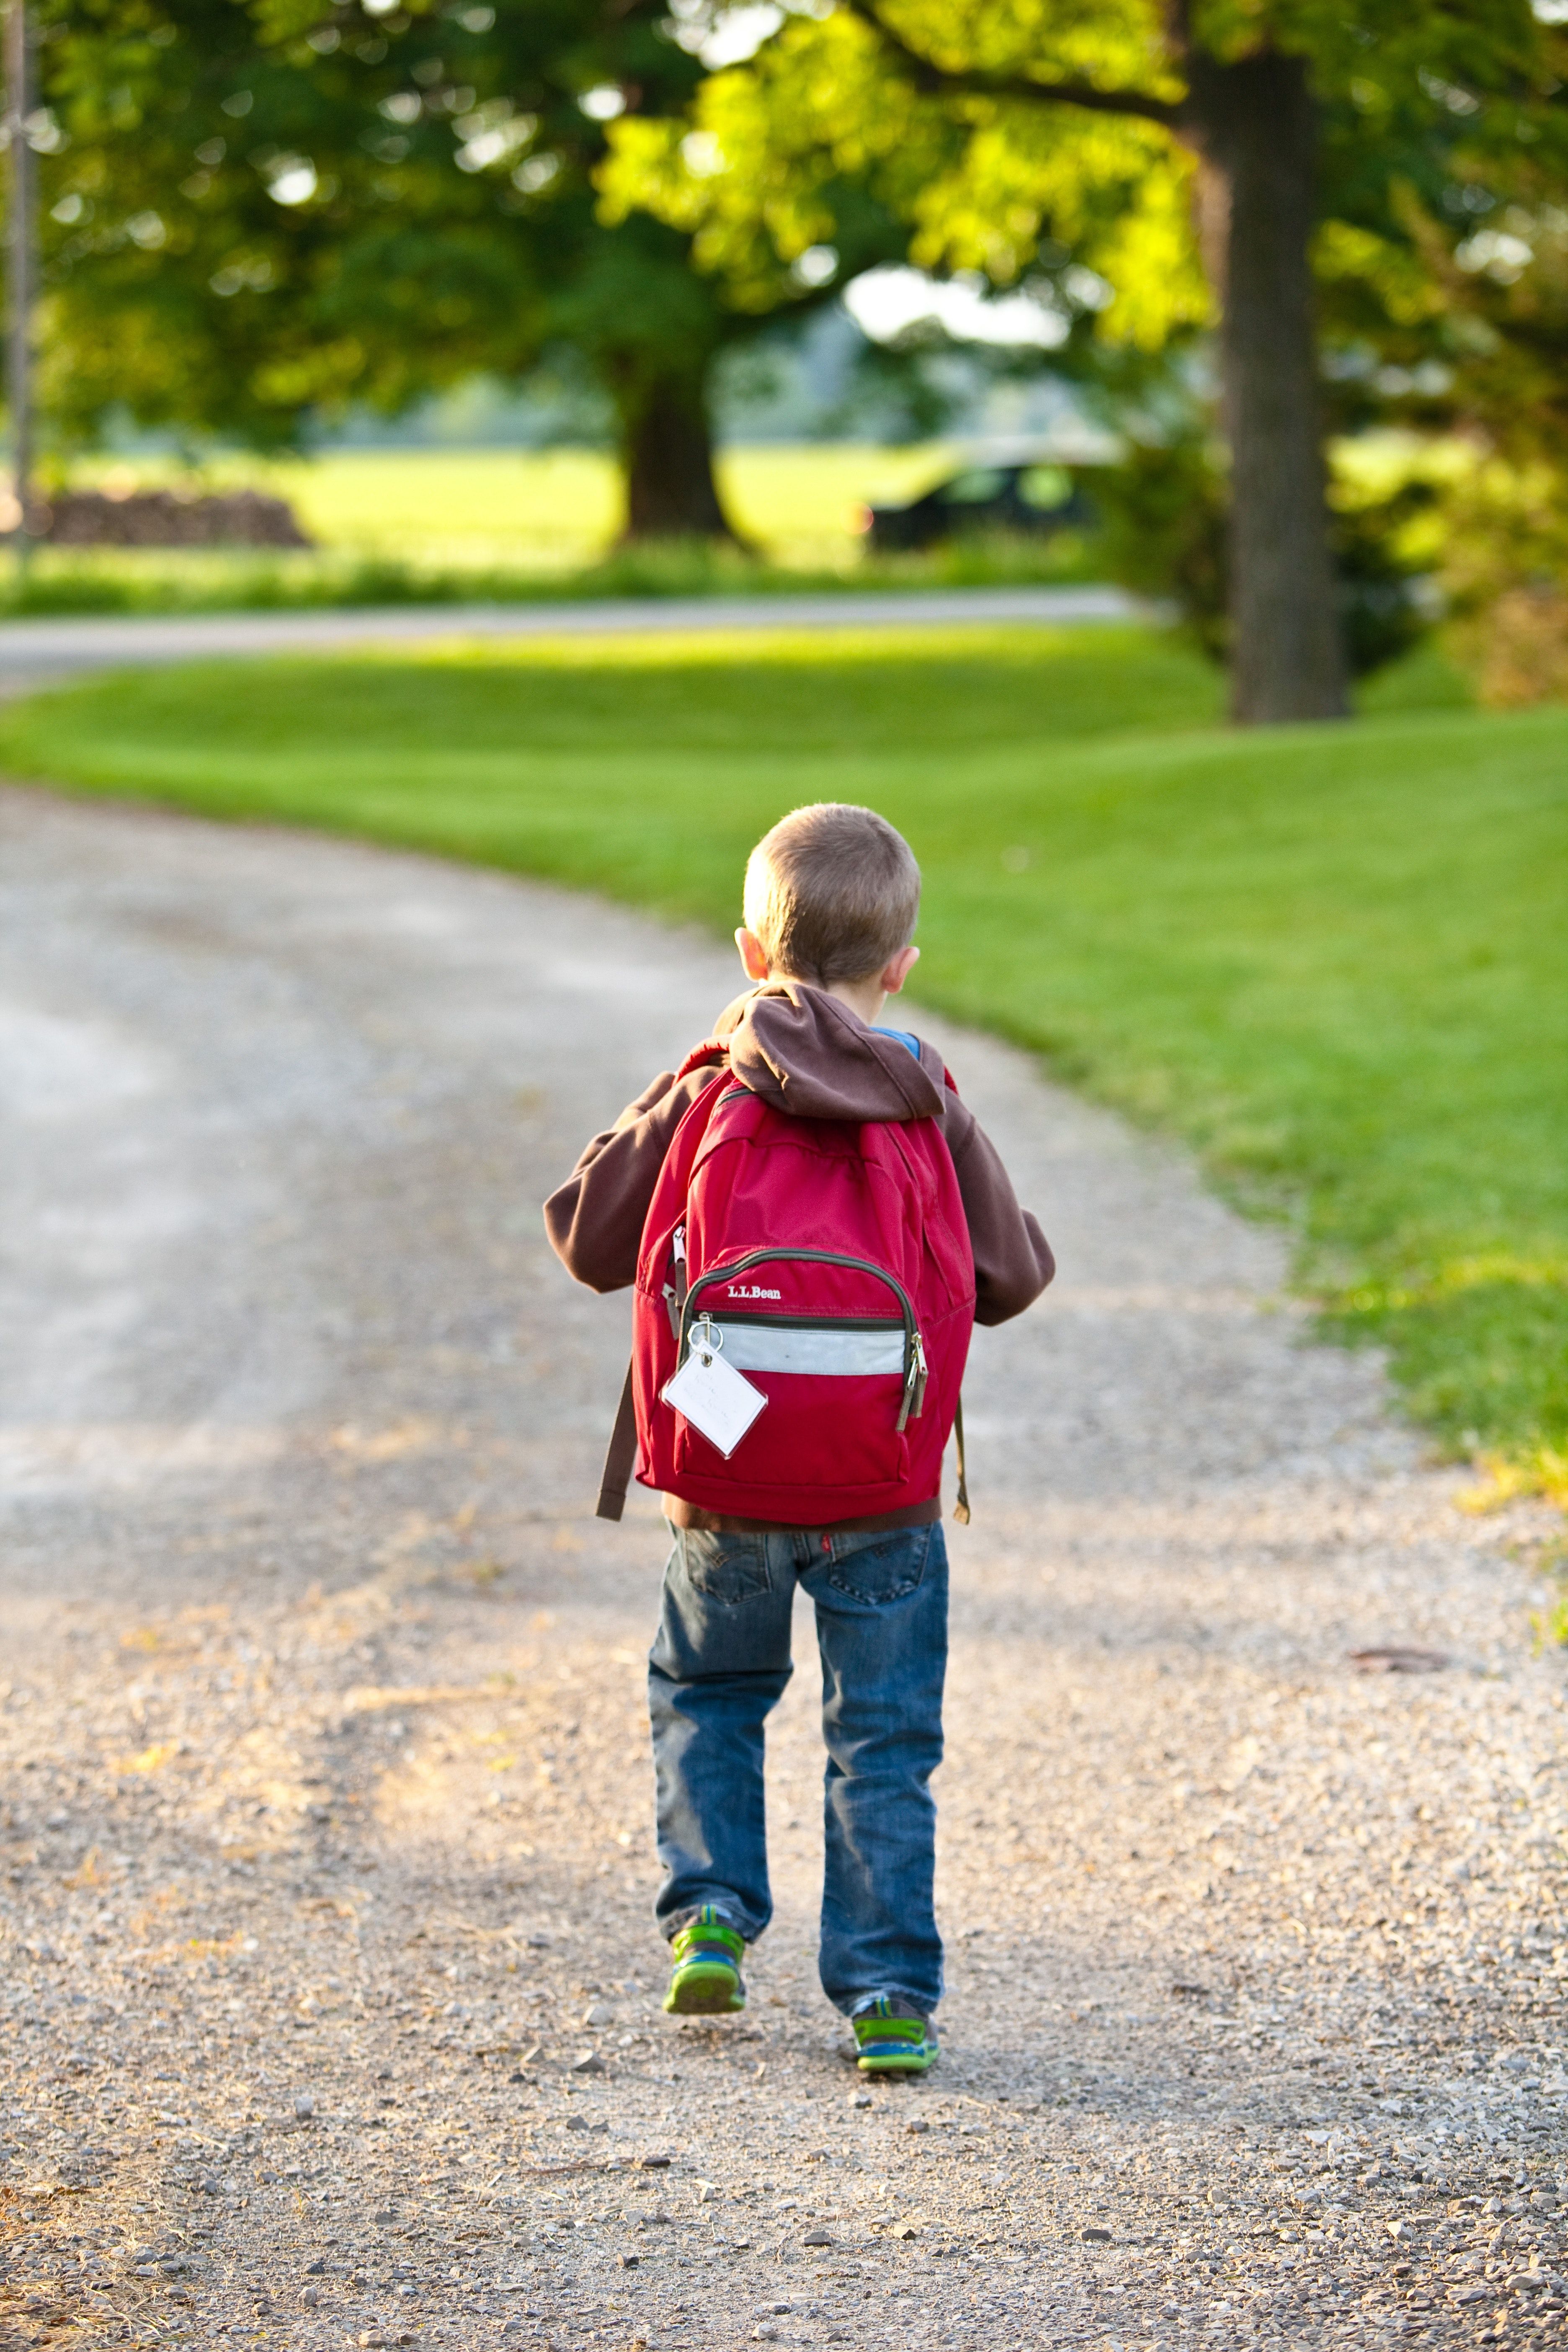 Cute Cool Attitude Boy Pic For Fb - Kid Starting School , HD Wallpaper & Backgrounds